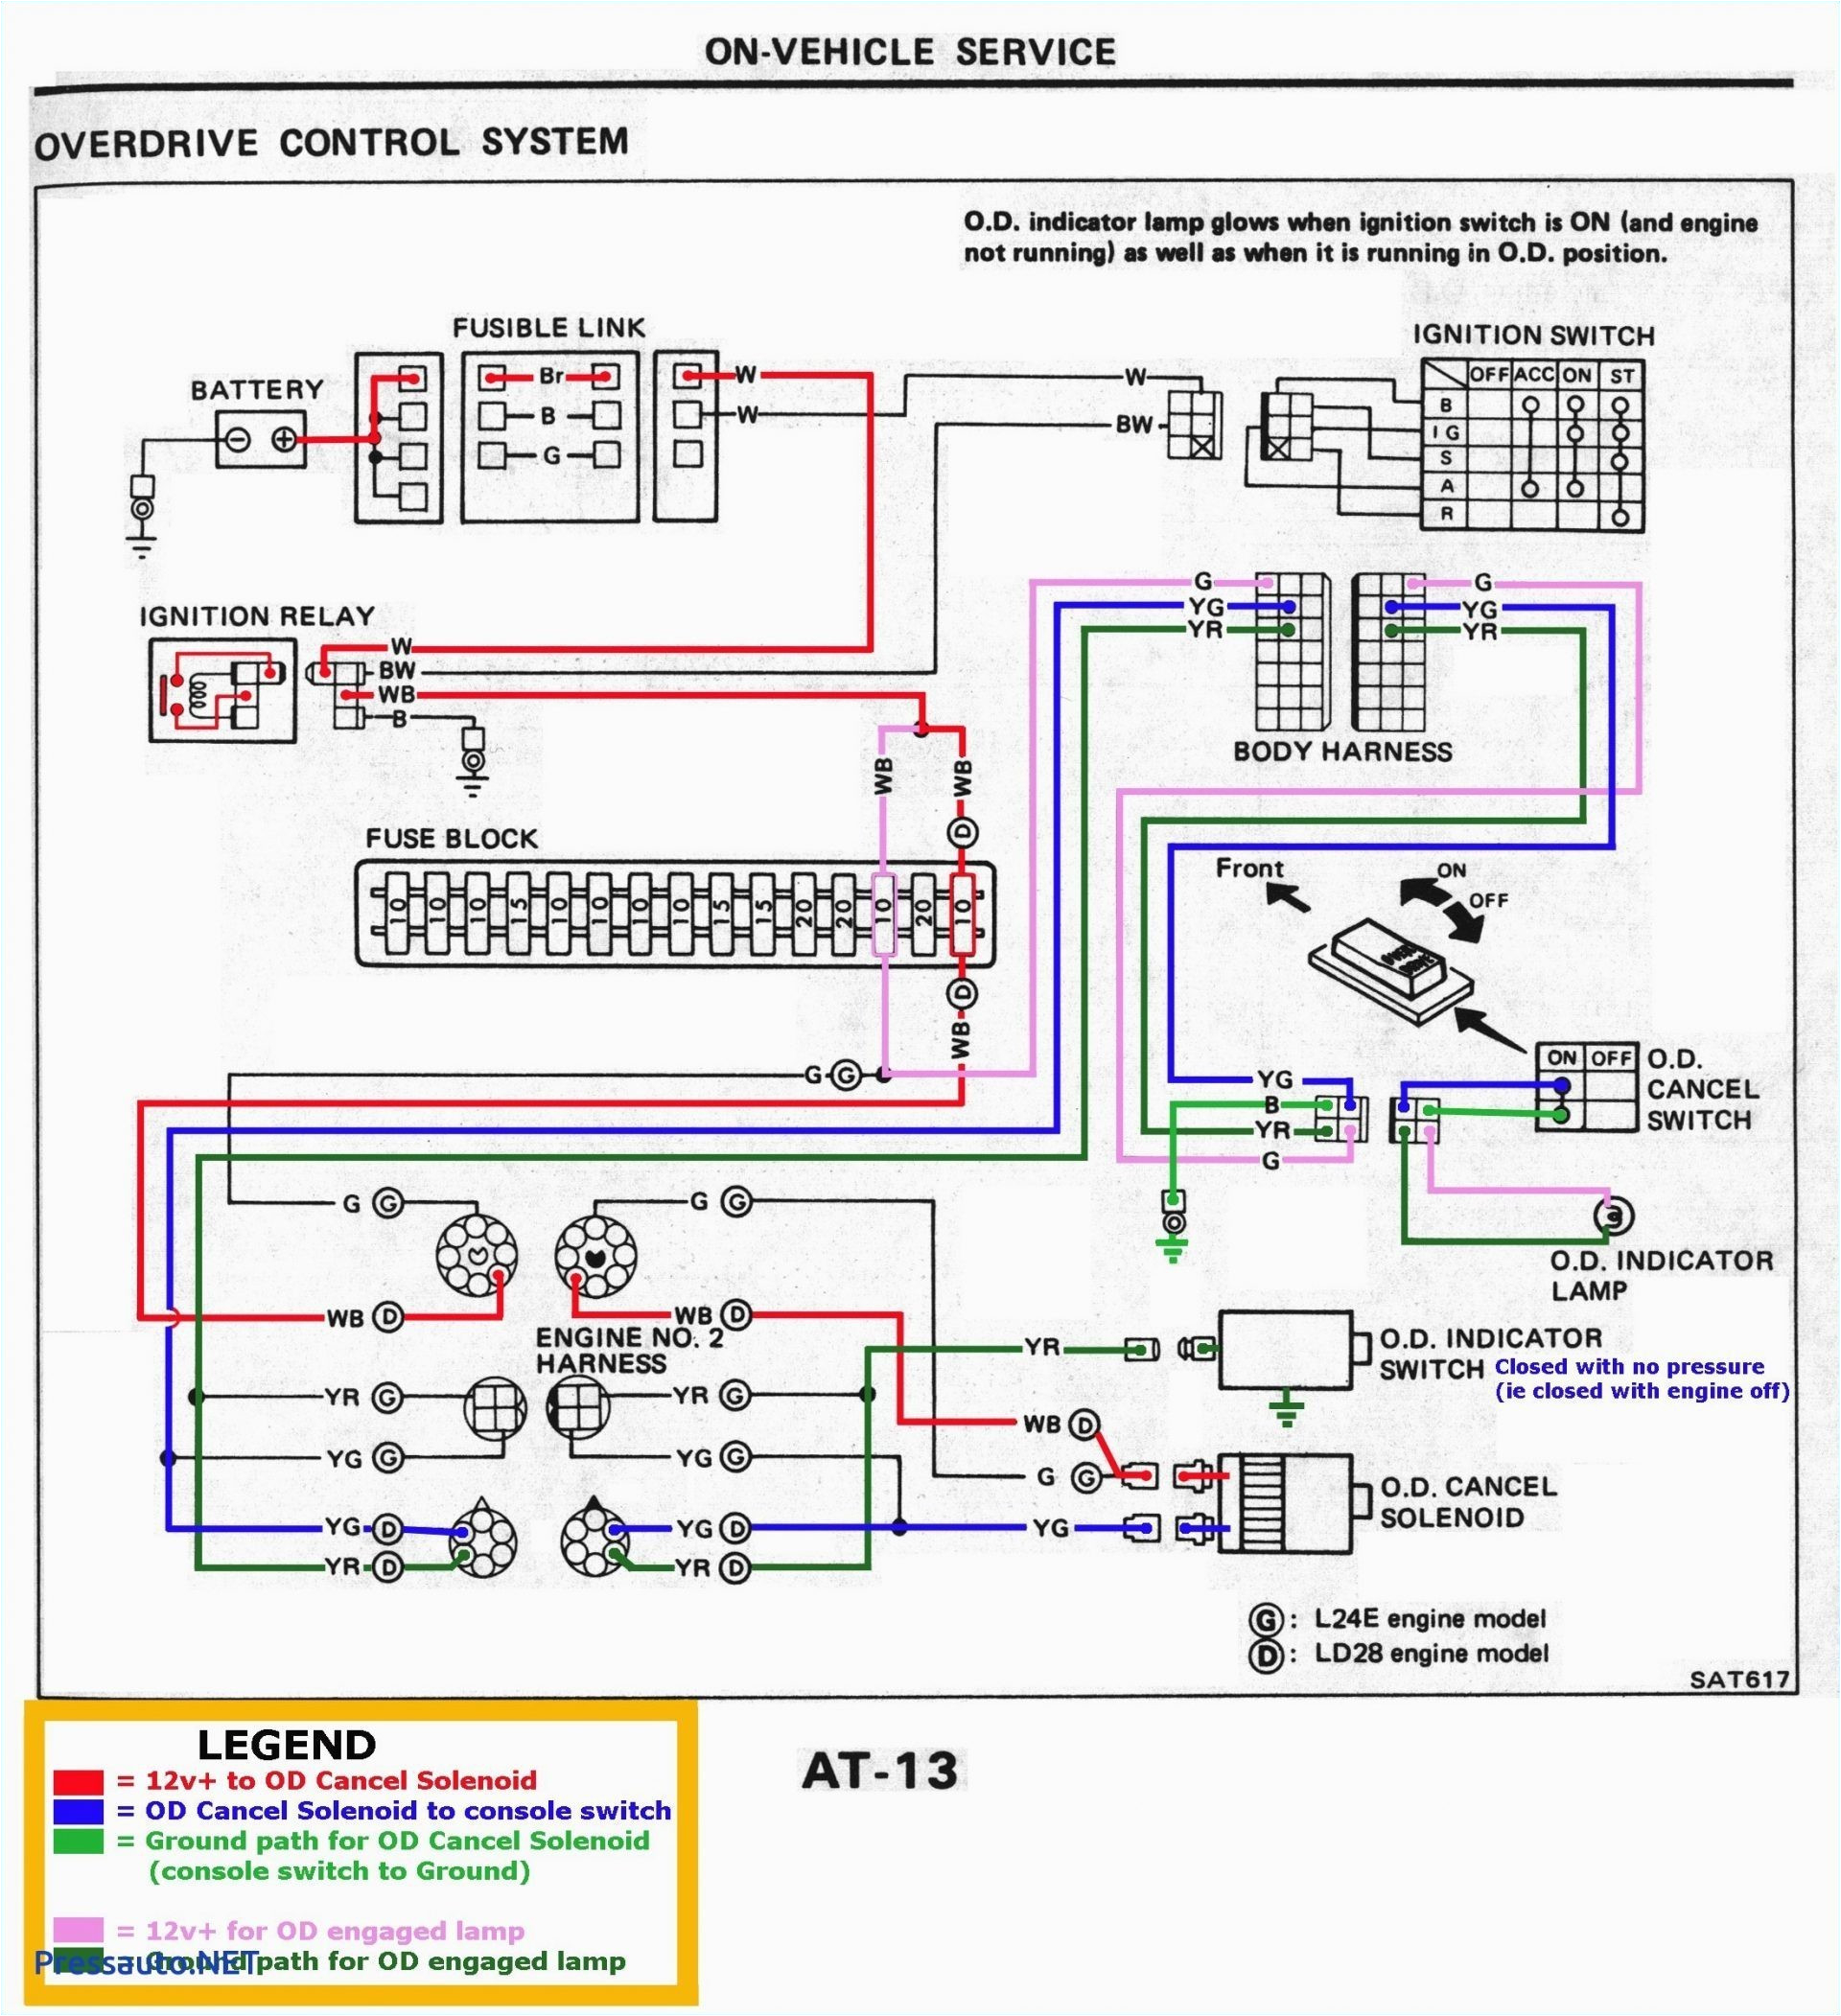 2000 Chevy Silverado Ignition Switch Wiring Diagram Wiring Diagram Also Distributor Diagram Furthermore Chevy Ignition